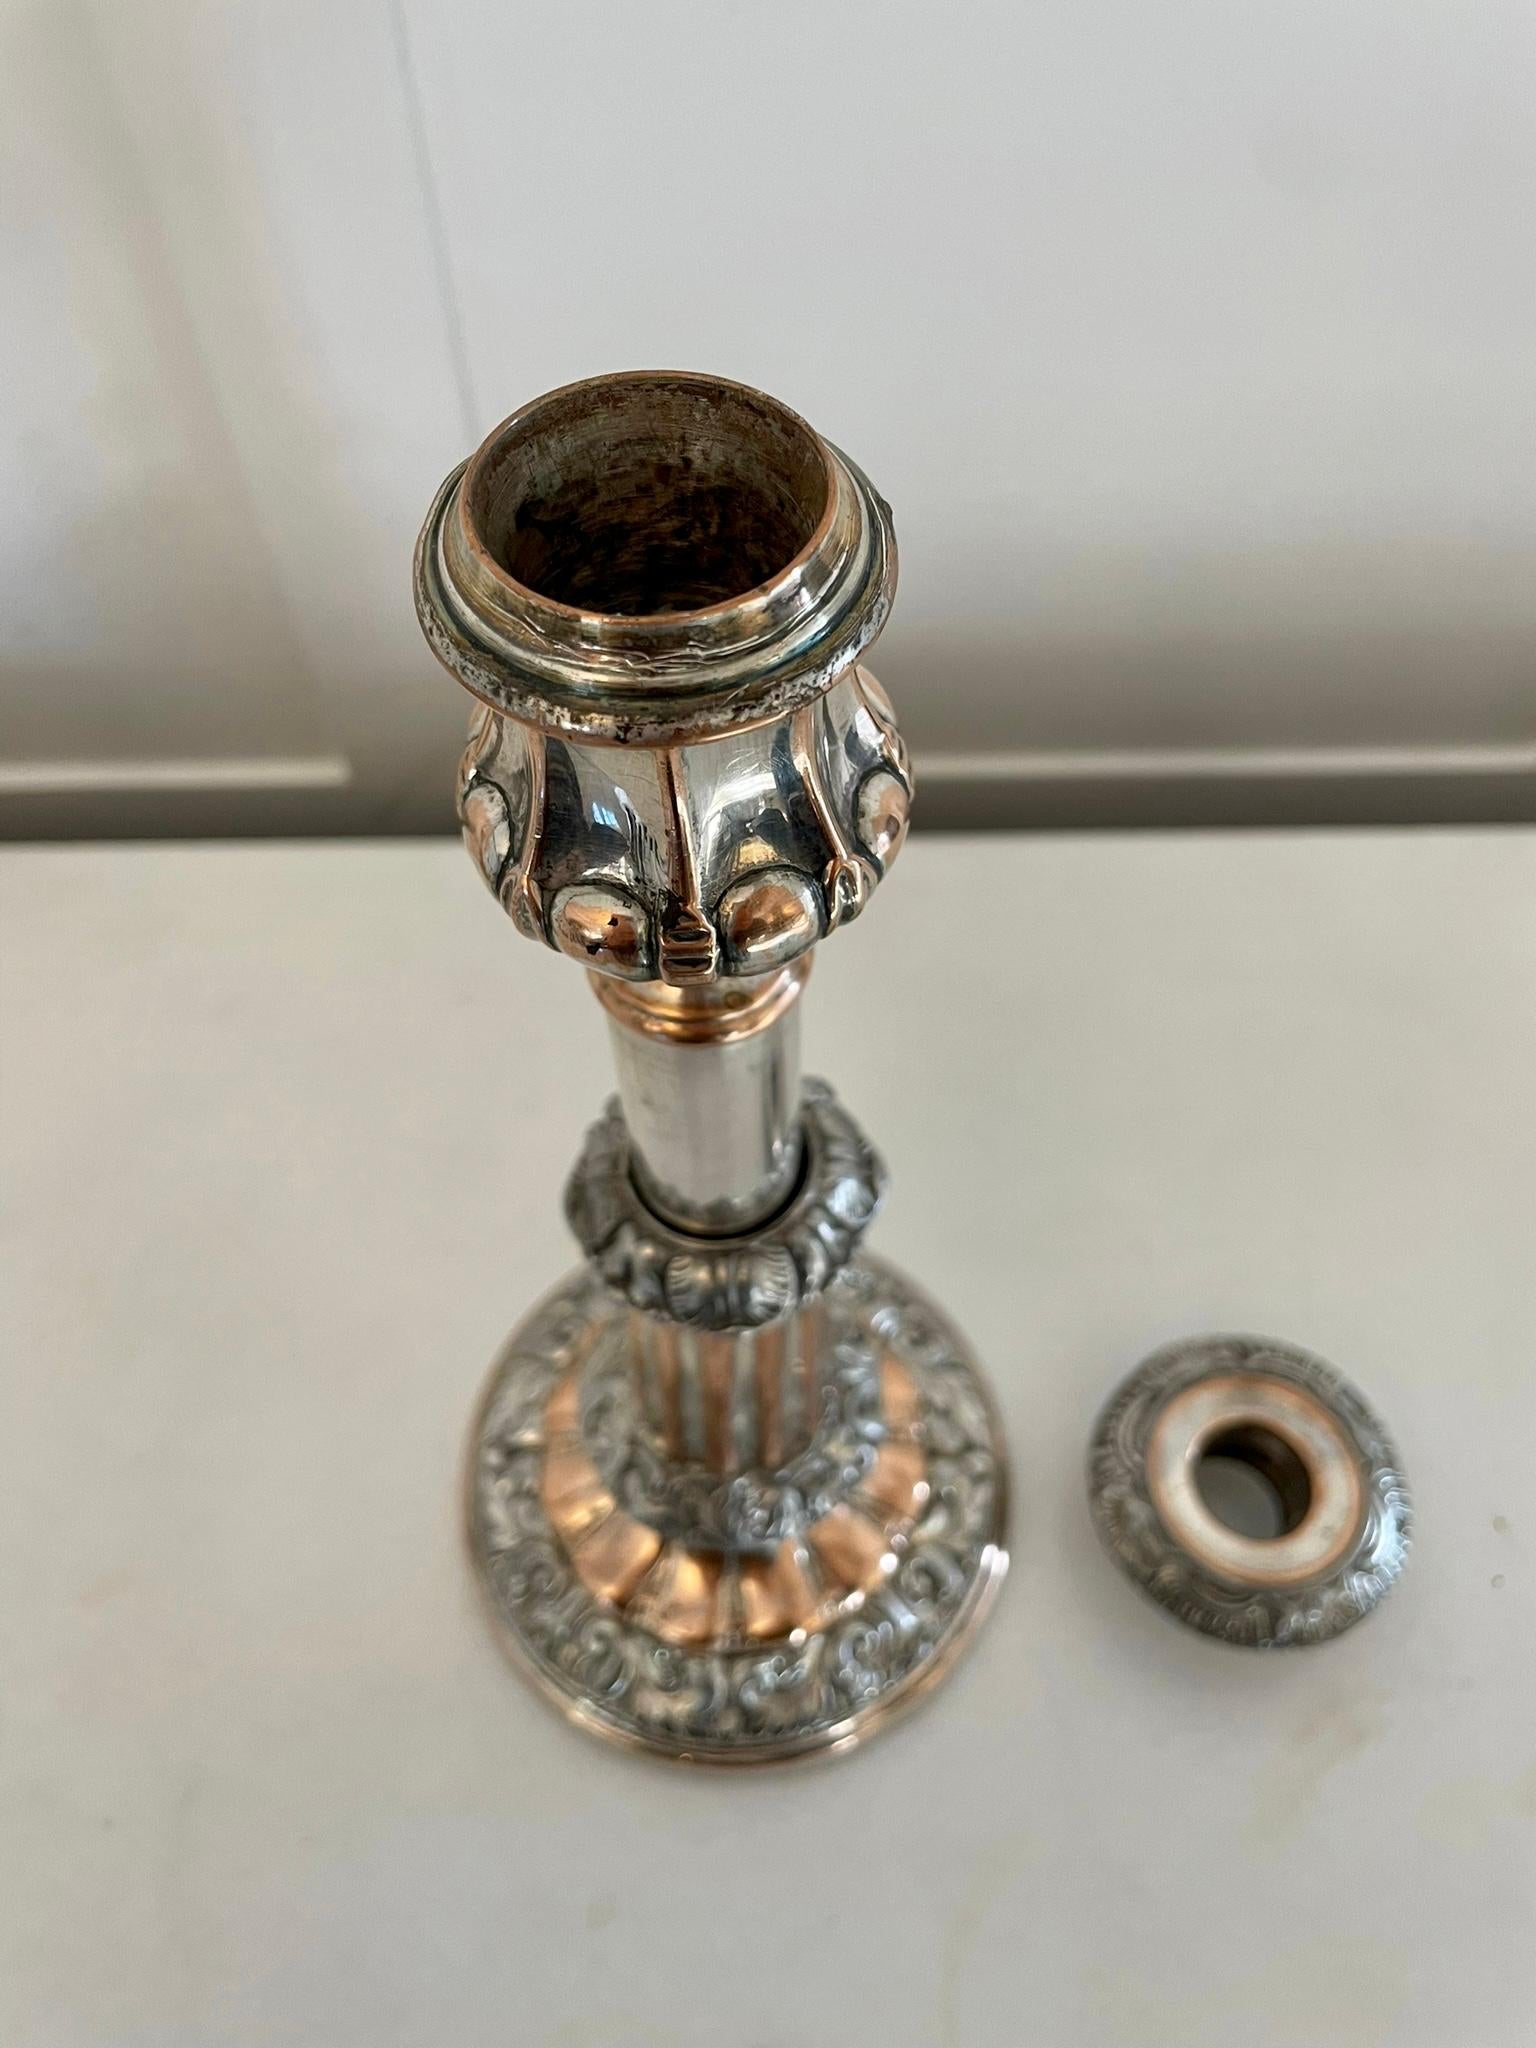 Unusual pair of antique George III quality Sheffield plated telescopic candlesticks having a quality pair of antique George III Sheffield plated telescopic candlesticks with ornate decoration 

A quaint decorative pair beautifully designed and